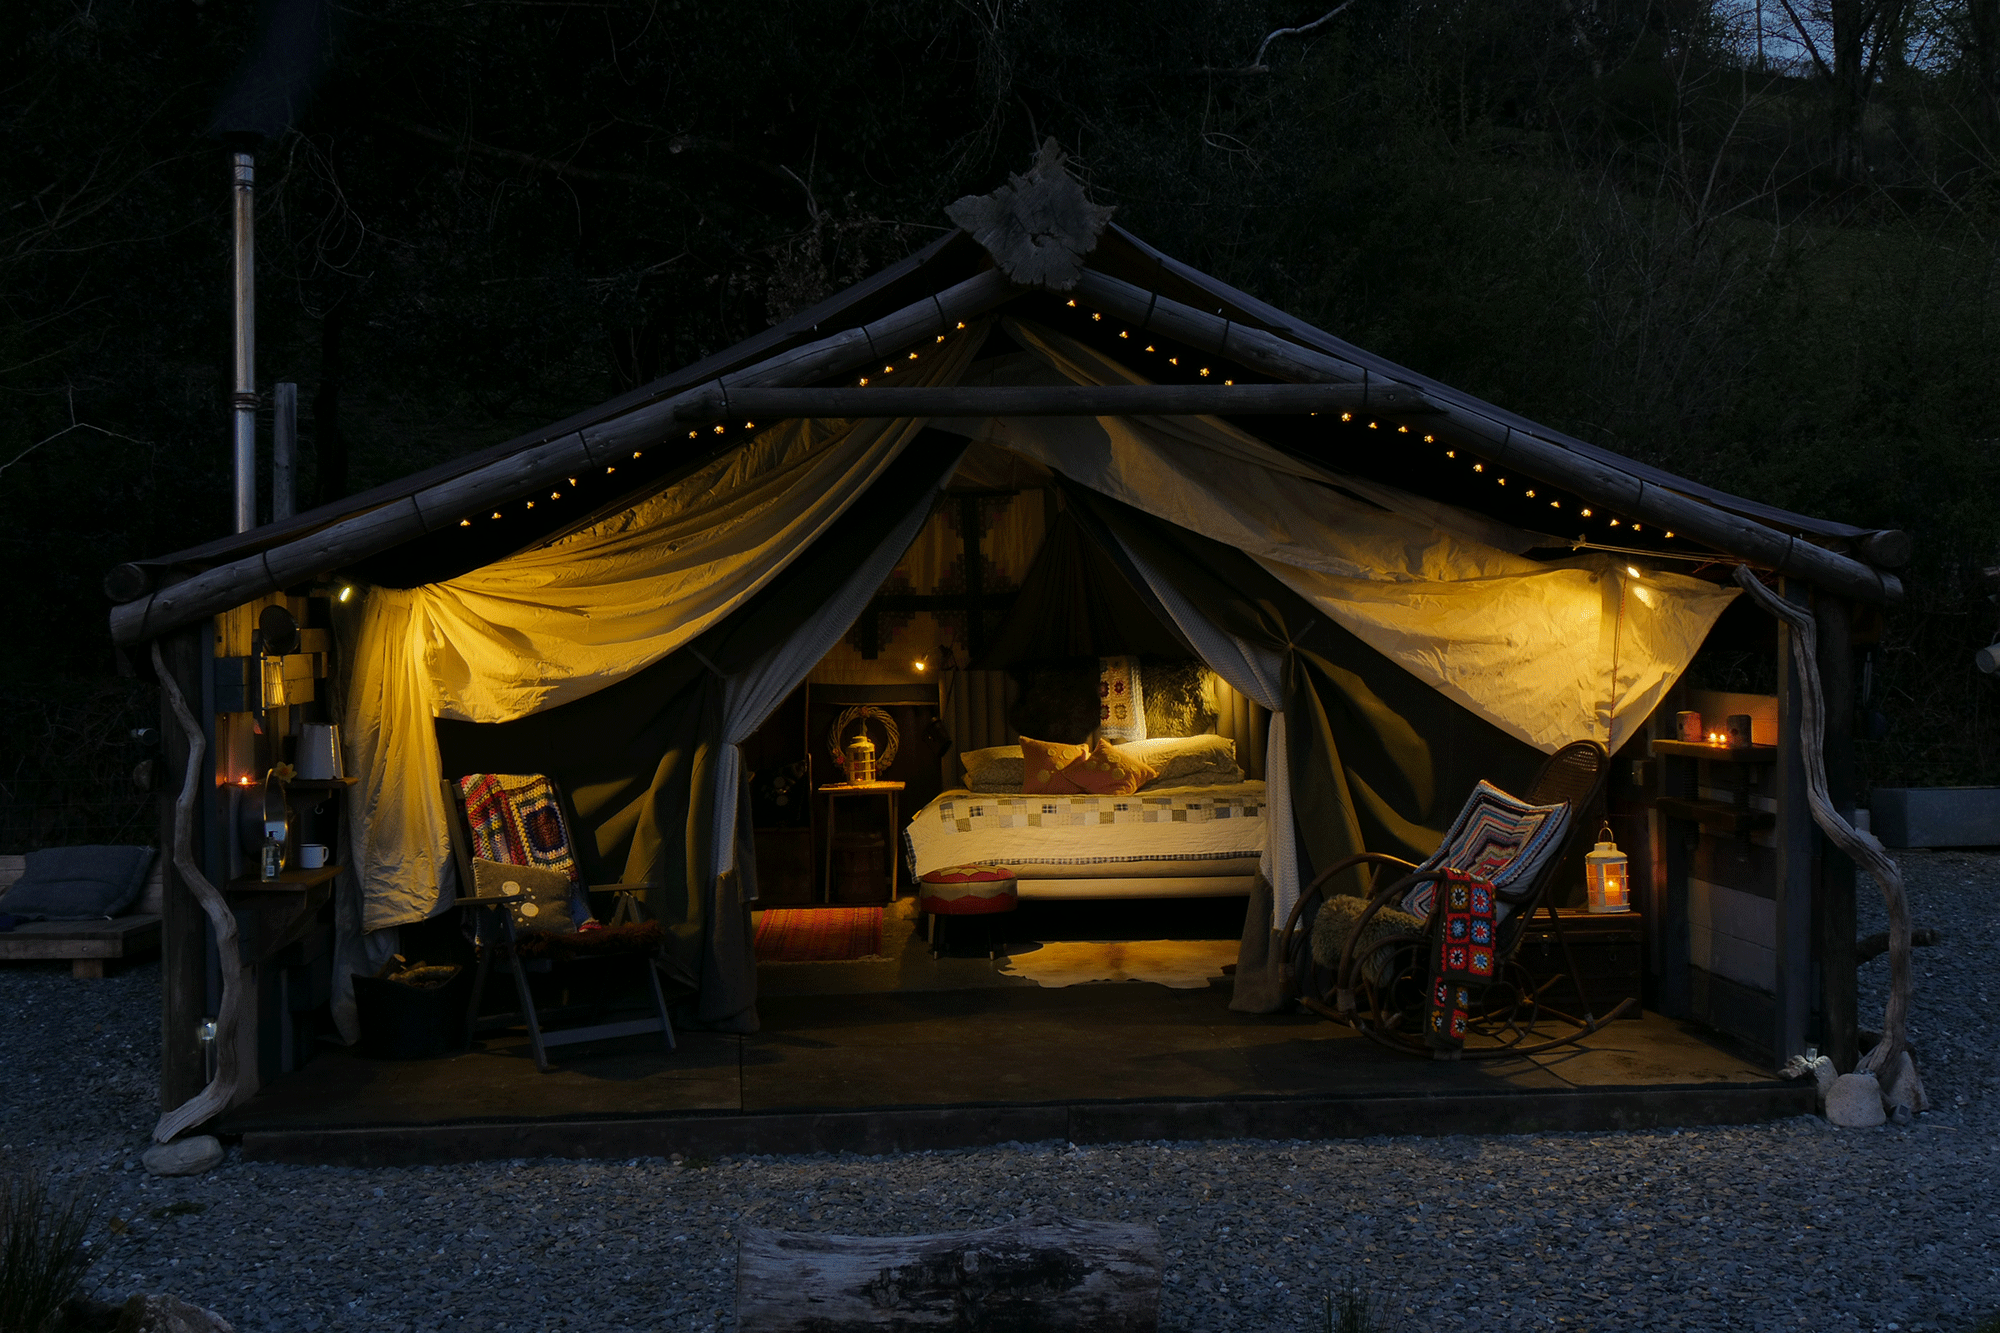 Leewood Glamping, Romantic Rural Seclusion. Connect with Each Other.Connect with Nature,